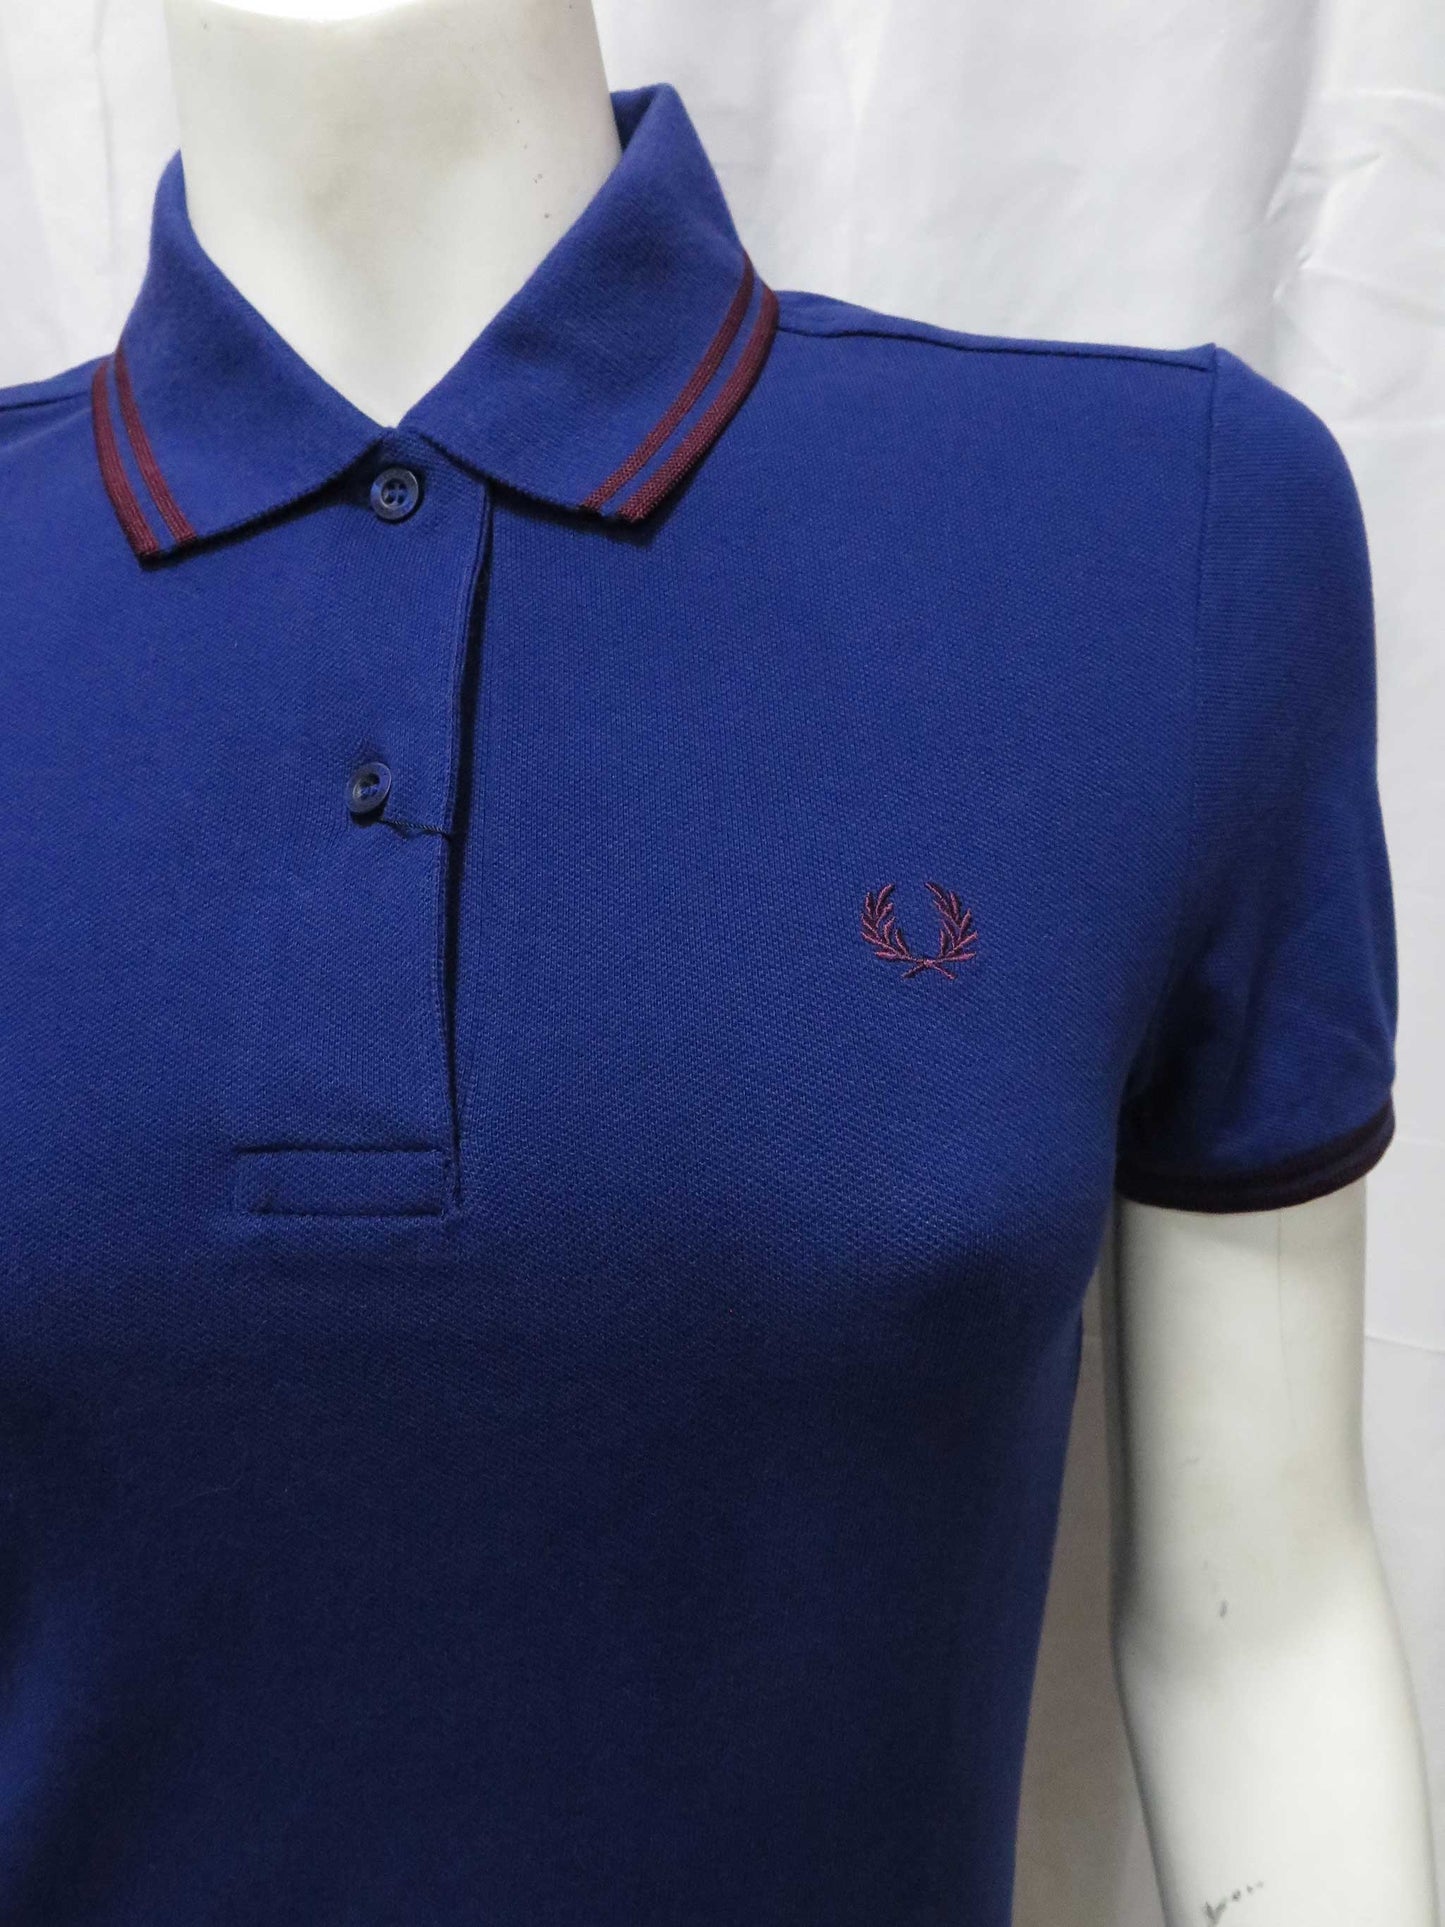 LADIES TWIN TIPPED FRED PERRY SHIRT (MEDIEVAL BLUE/MAROON)